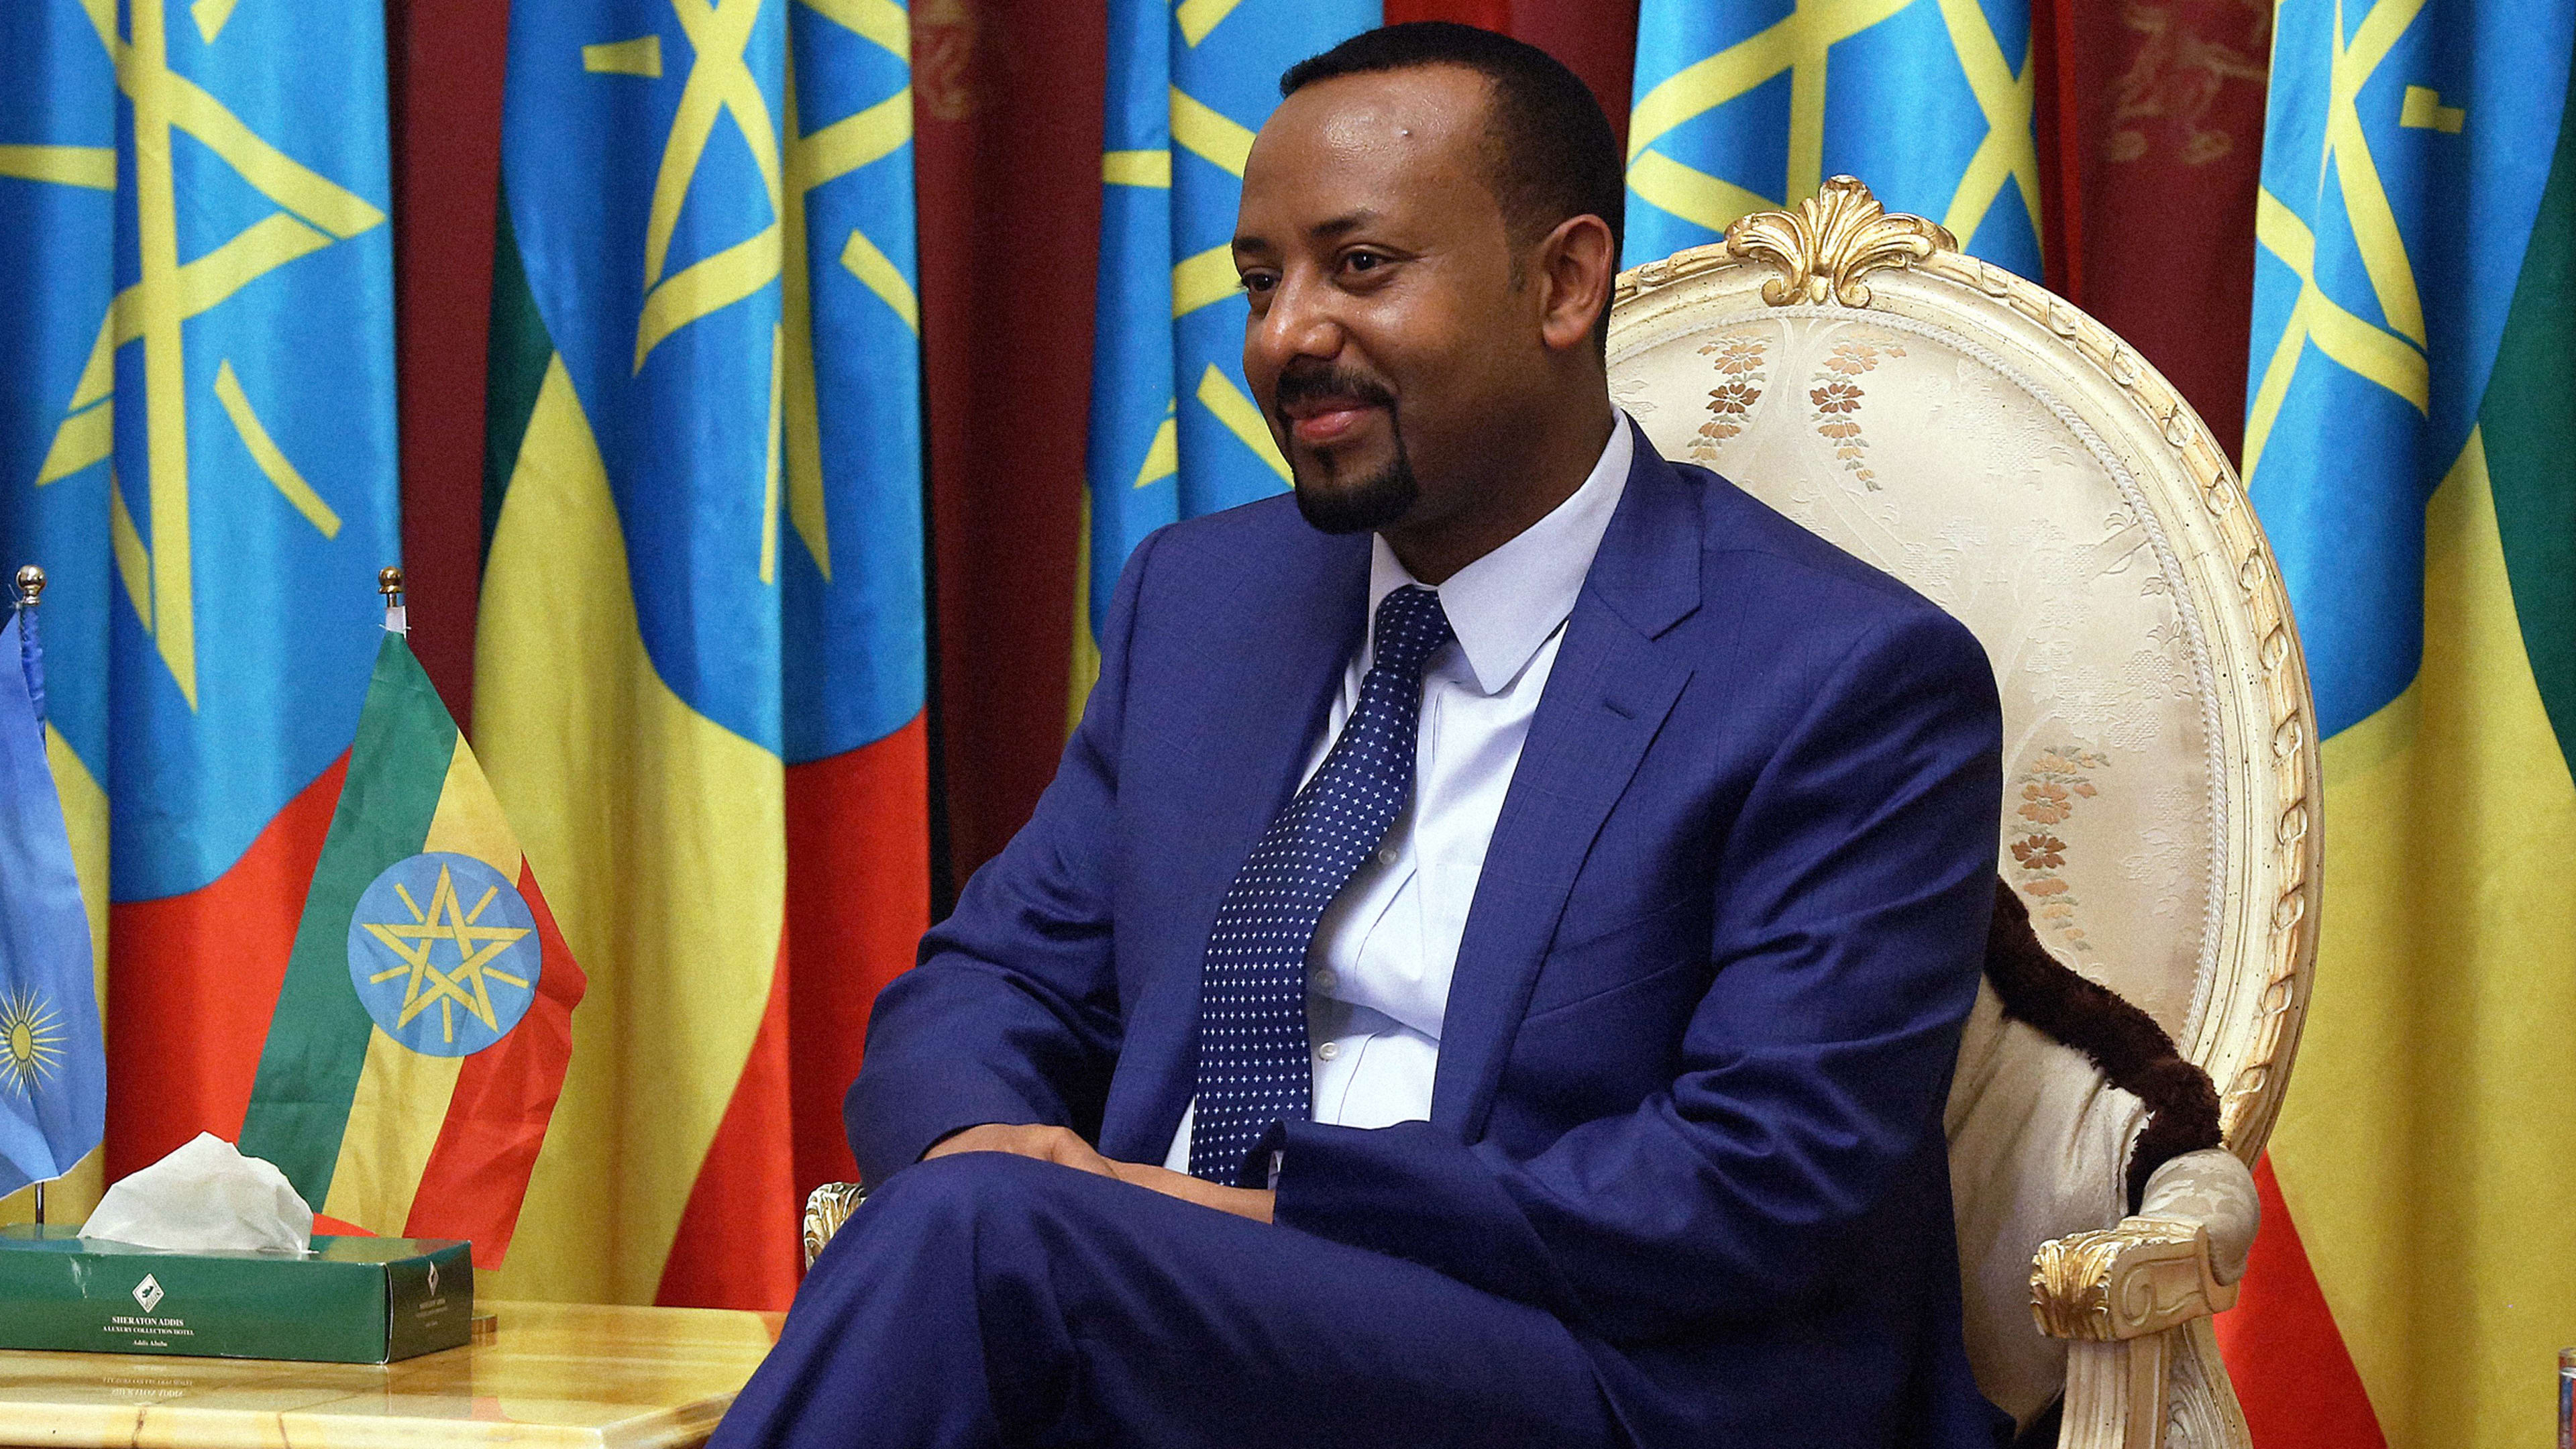 What’s next for Ethiopia now that Prime Minister Abiy Ahmed has won the Nobel Peace Prize